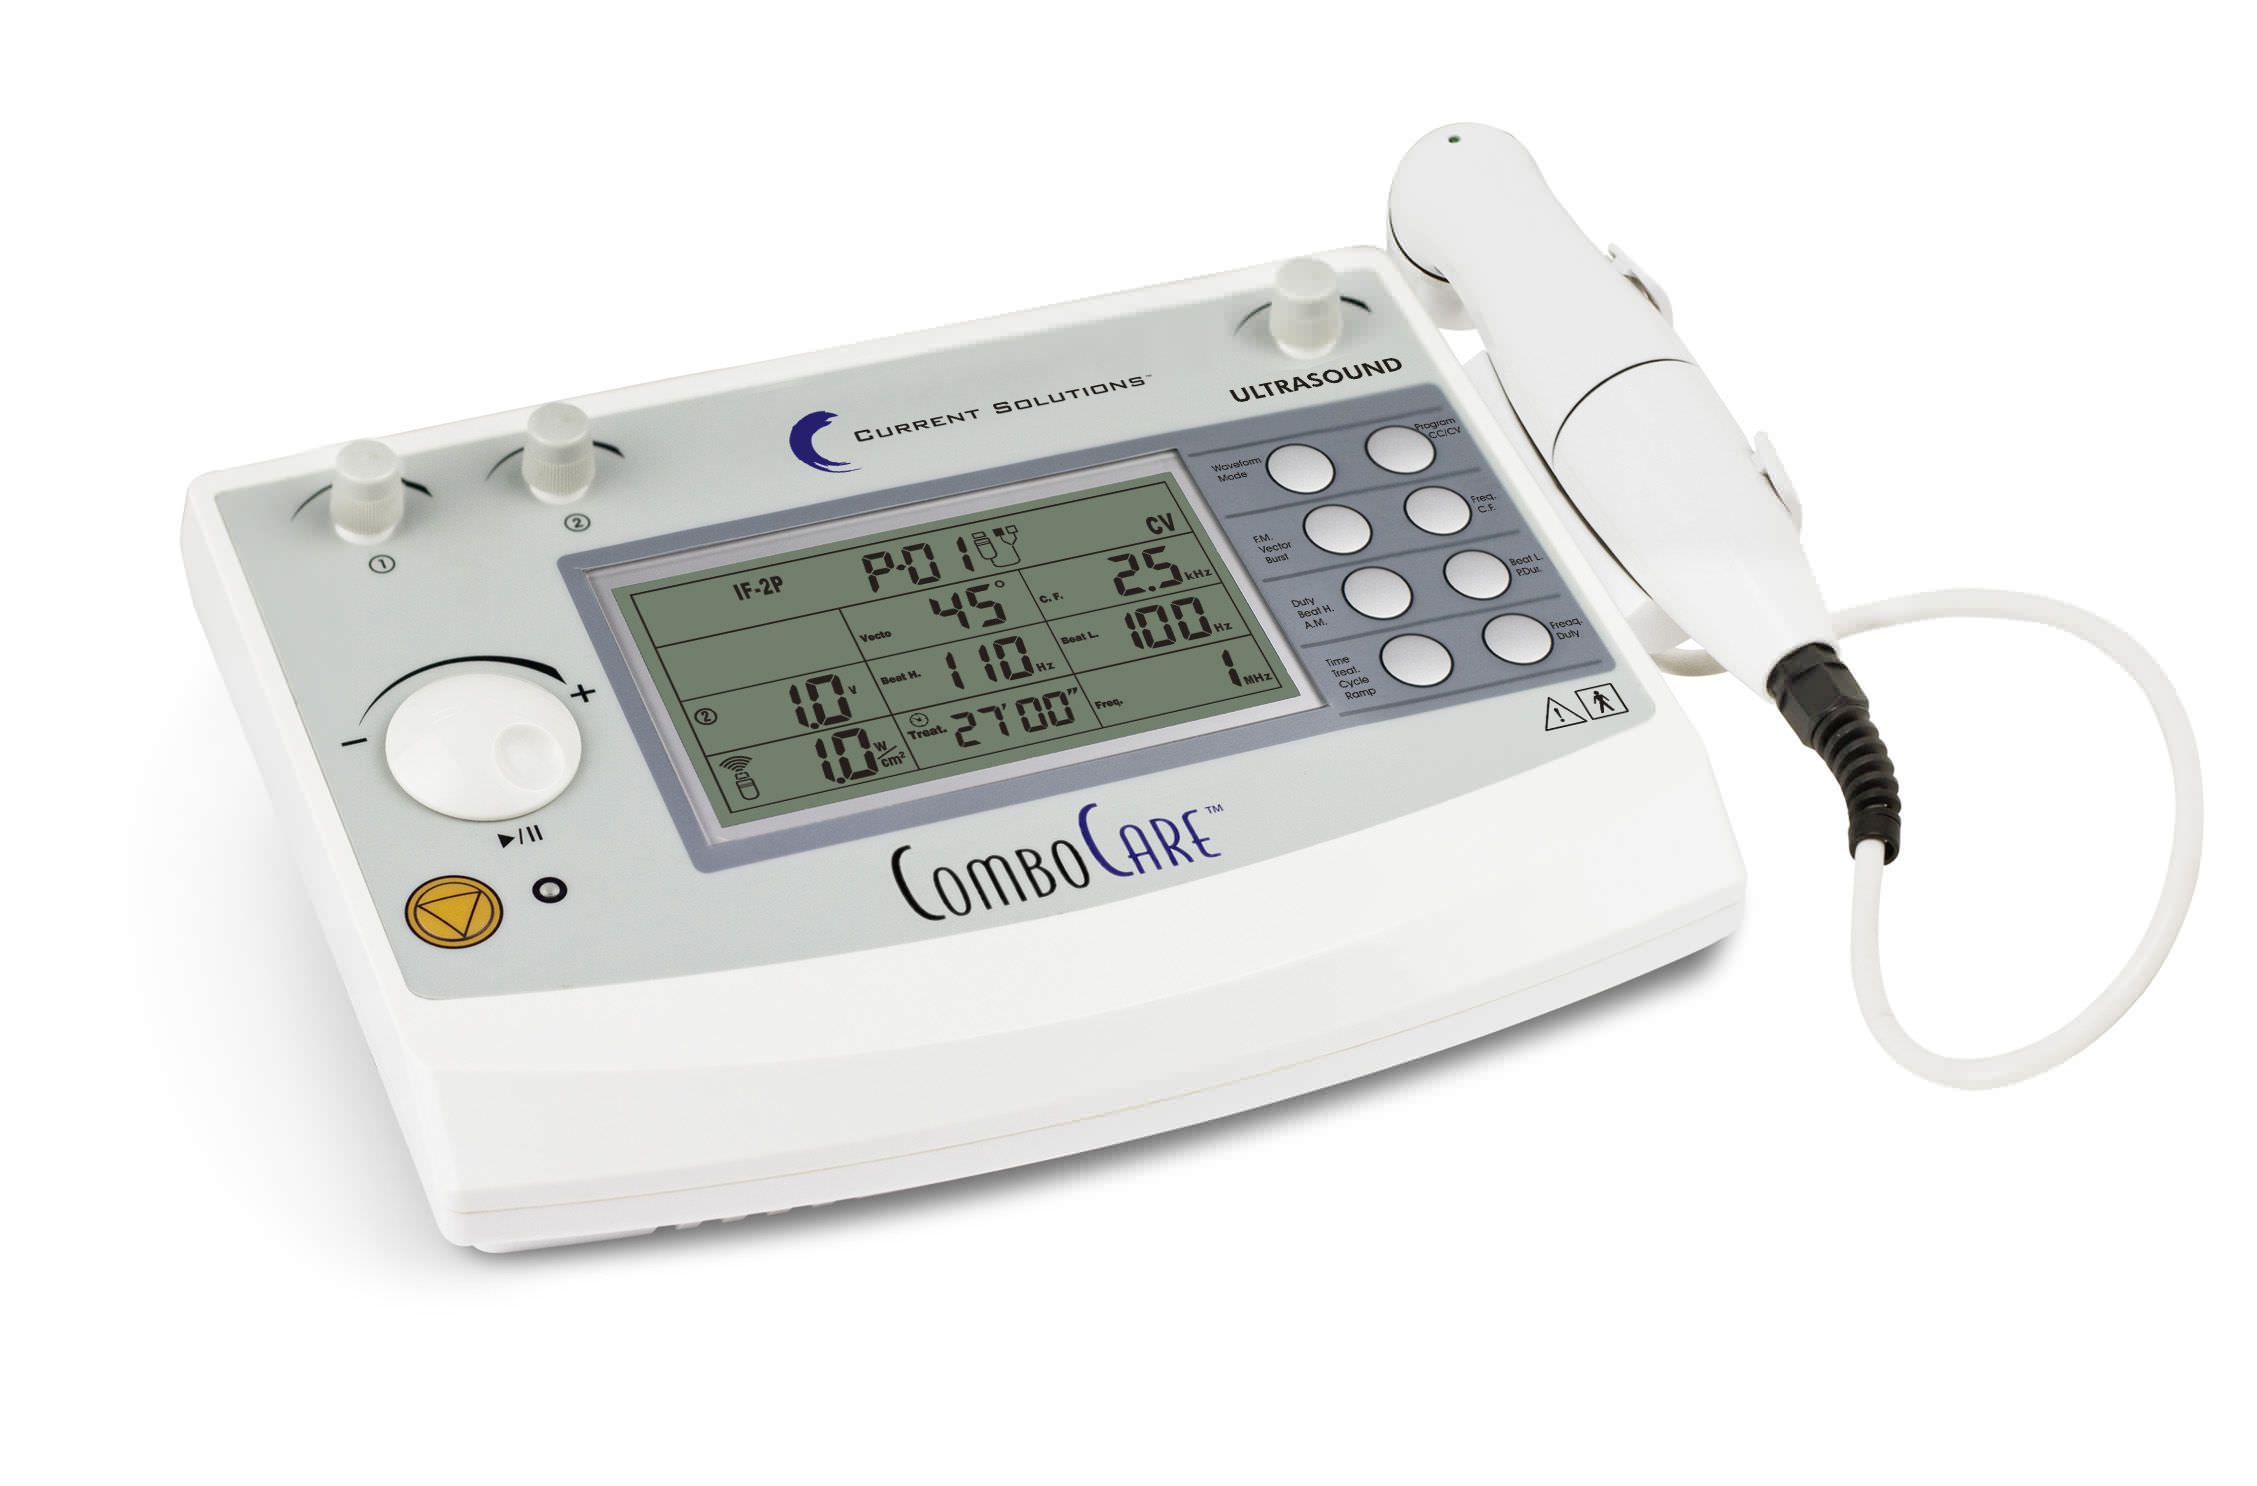 Electro-stimulator (physiotherapy) / TENS / IF / EMS ComboCare™ Current Solutions